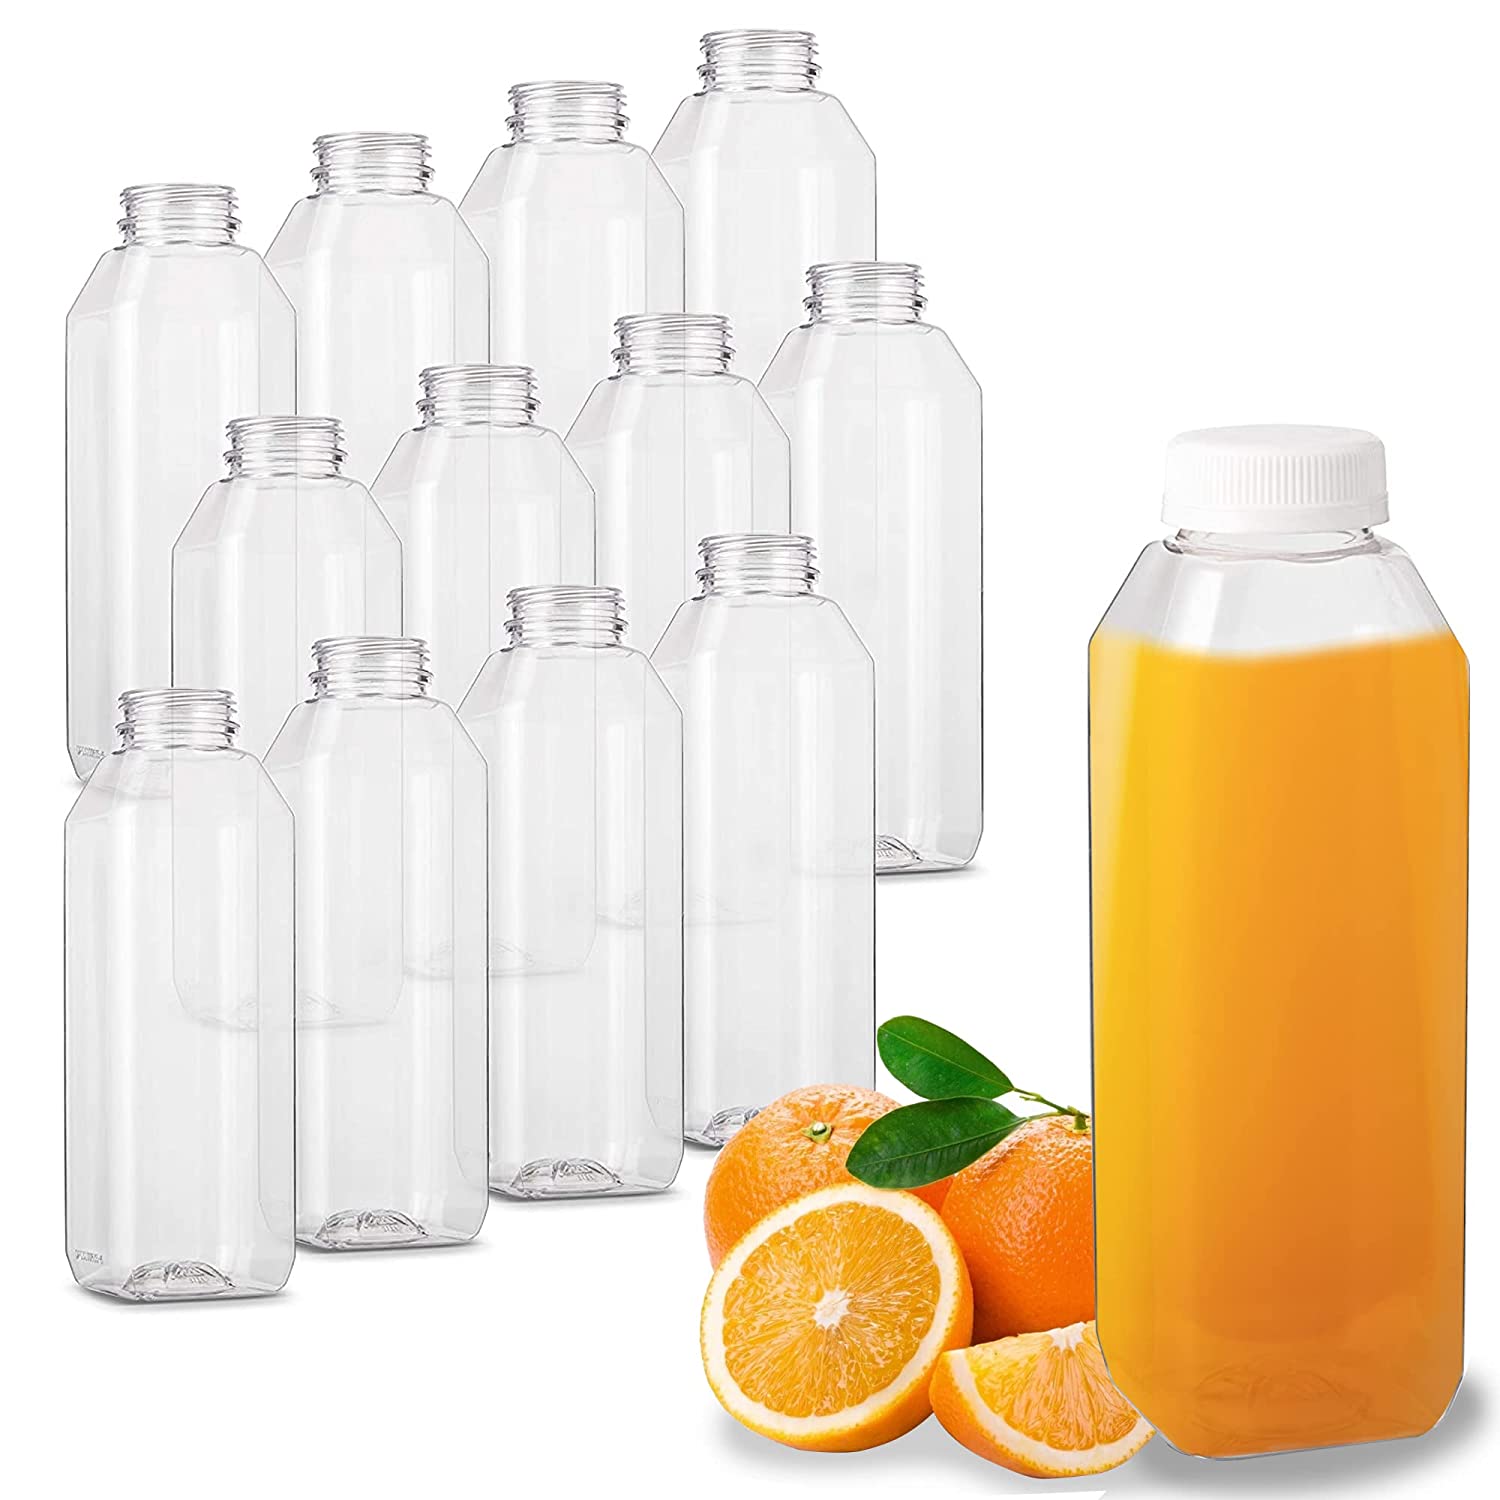 10 Pack) 12oz Empty Clear PET Plastic Juice Bottles with Black Caps -  Reusable Clear Bulk Beverage Containers with Tamper Evident Lids - Green  Juice, Smoothie, Milk, Meal Prep Juice Containers 